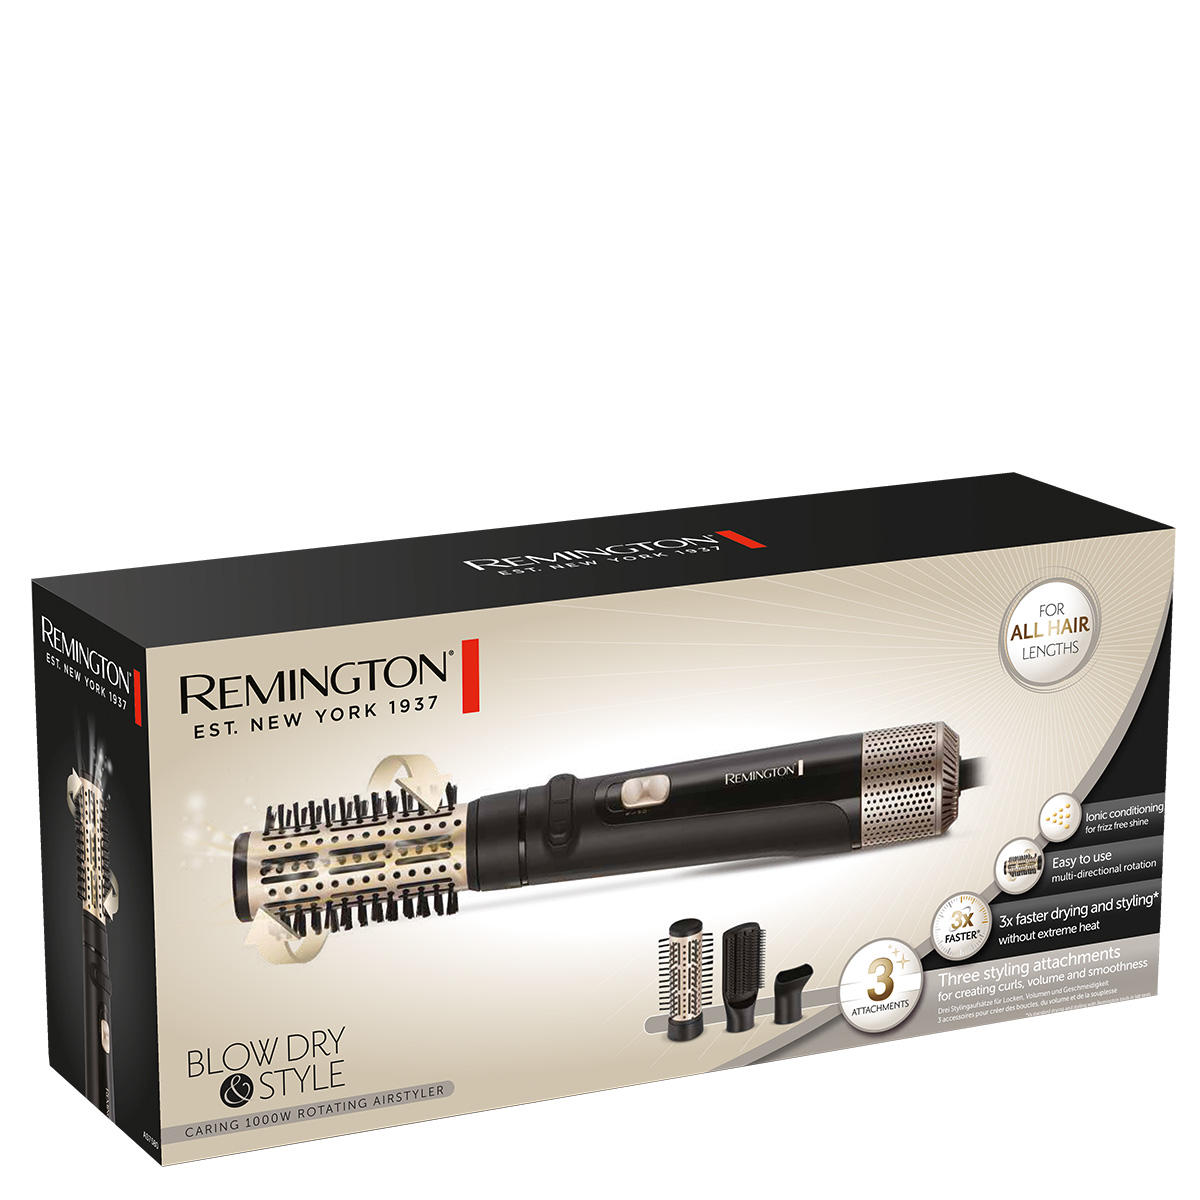 Remington AS7580 Blow Dry & Style Warm Air Brush  - 2